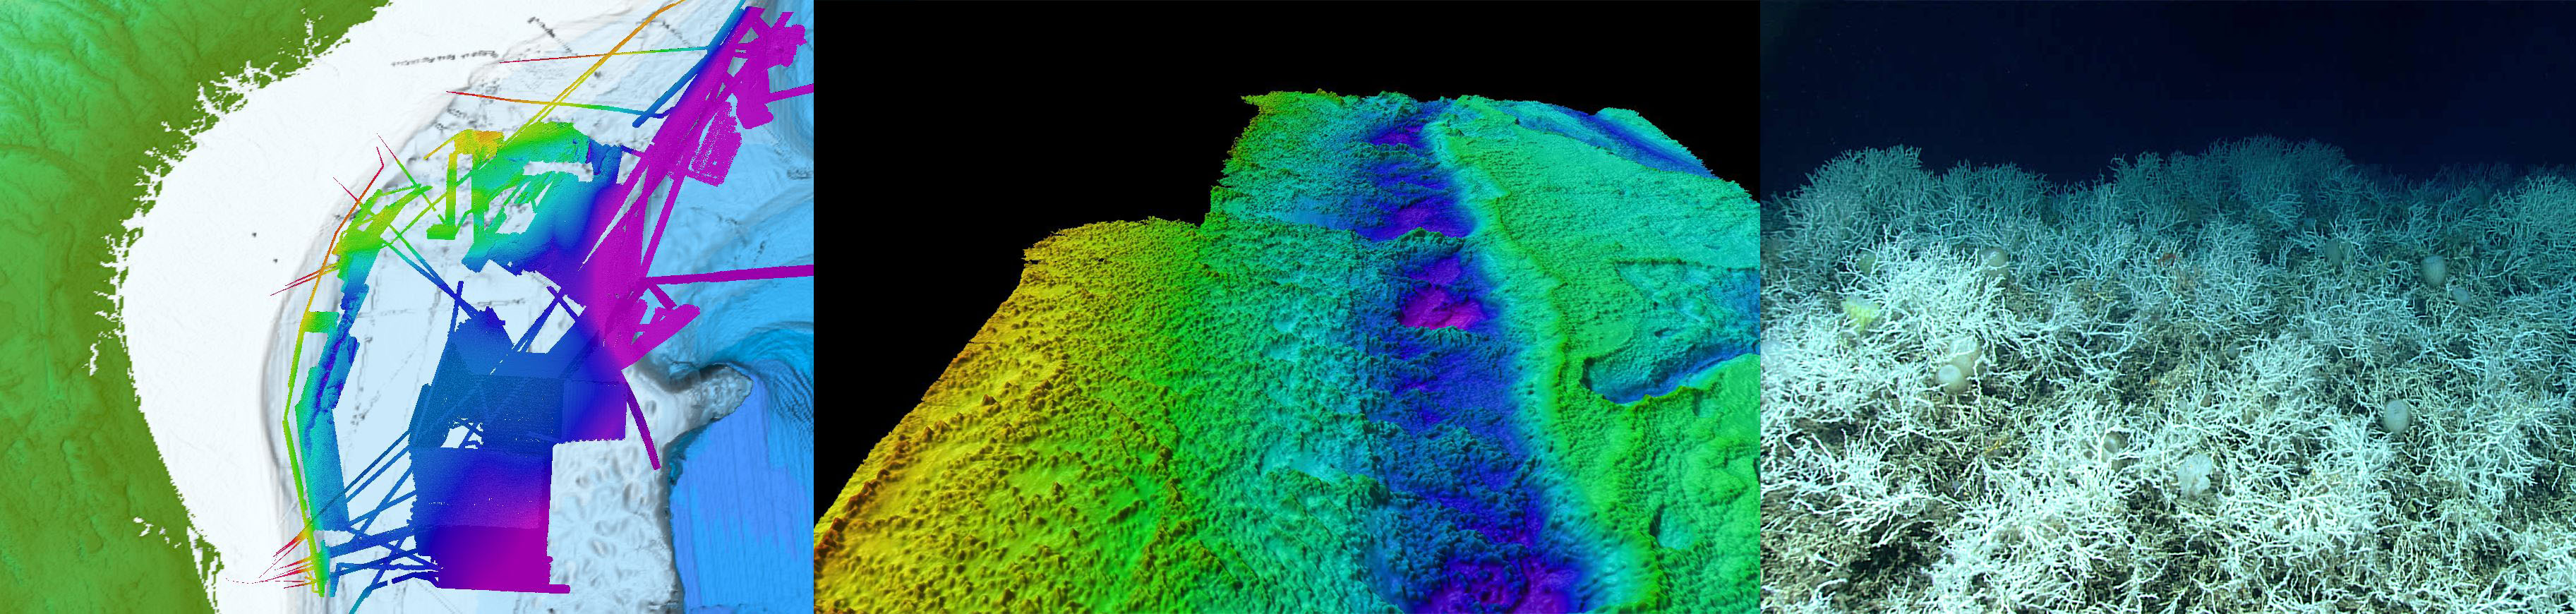 NOAA Ocean Exploration has been mapping the seafloor of the Blake Plateau off the Southeast United States aboard NOAA Ship Okeanos Explorer (left) since 2011. As a result of this mapping, NOAA Ocean Exploration and partner scientists discovered mounds of extensive, dense populations of the deep-sea, reef-building coral Lophelia pertusa (middle and right) — some in areas previously believed to be flat and featureless. These mounds have been growing for thousands, perhaps millions, of years and provide shelter and habitat to a variety of marine life. Now, at 28,047 square kilometers (10,829 square miles), this area is considered to be the largest known deep-sea coral province in U.S. waters, possibly the world. Additional mapping data collected with the support of NOAA Ocean Exploration (not shown here) have contributed to a near complete map of the deep waters of the Blake Plateau, an area of interest for the National Strategy for Mapping, Exploring, and Characterizing the United States Exclusive Economic Zone.